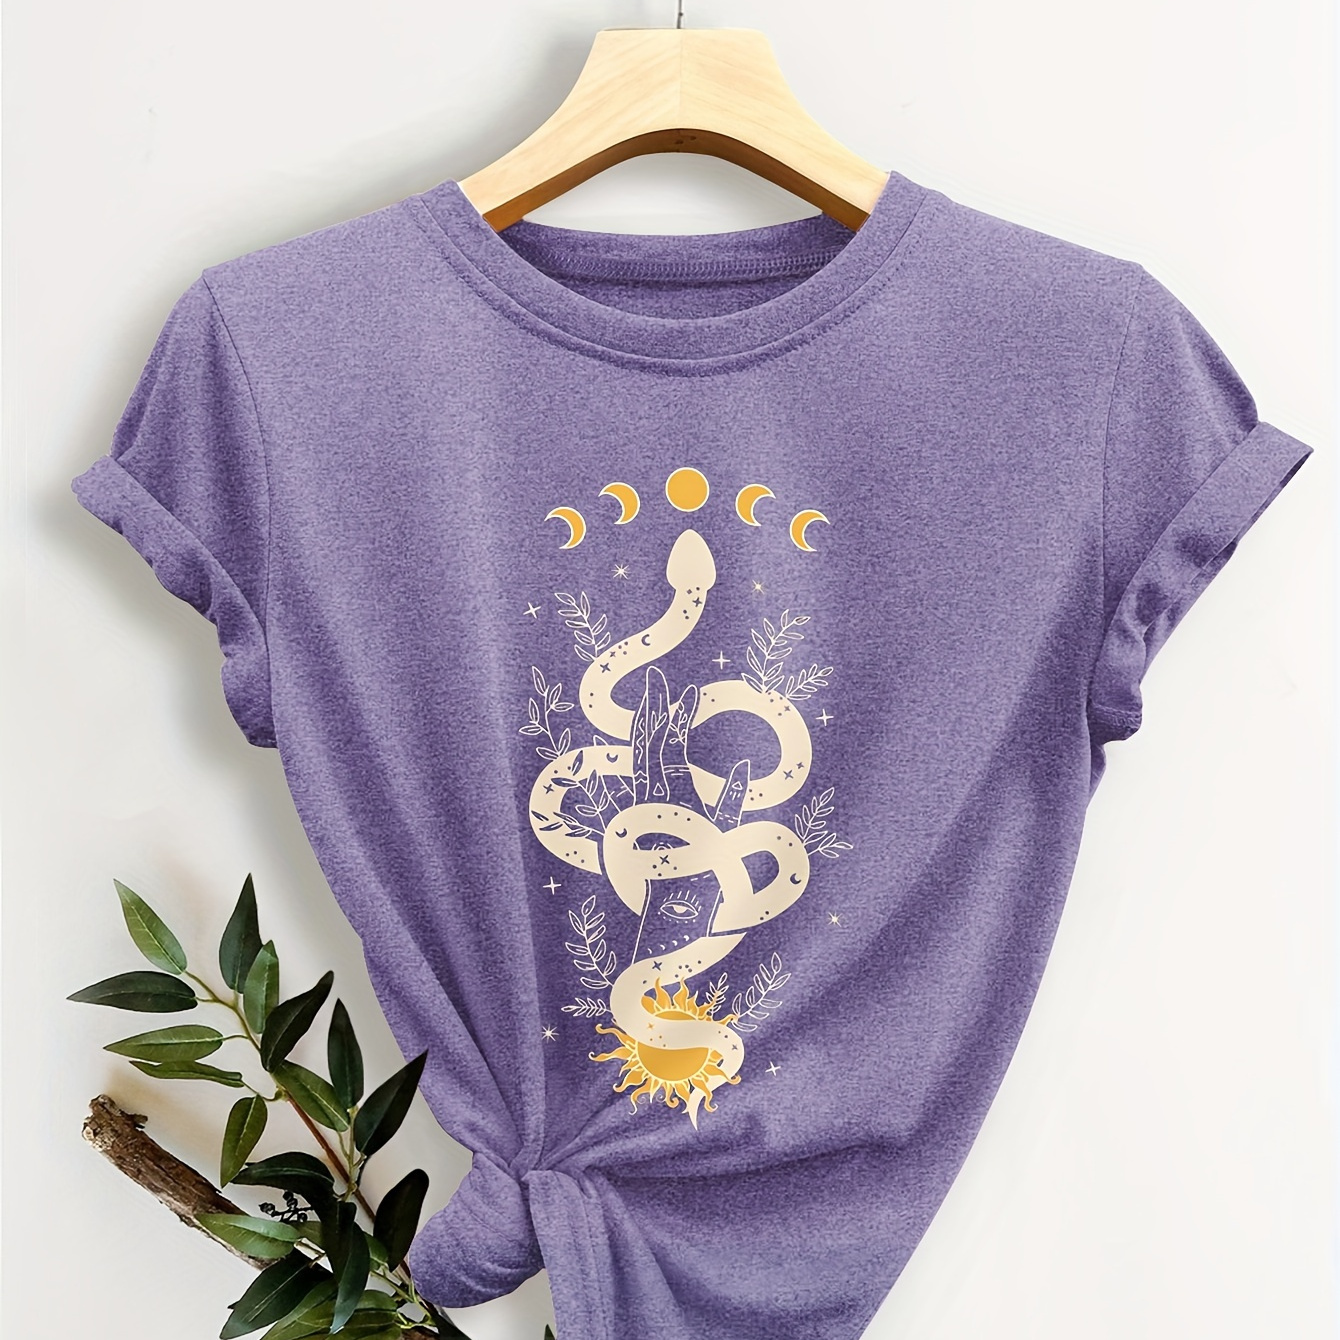 

Women's Moon & Snake Print Vintage-inspired Casual Tee, Round Neck Short Sleeve T-shirt, Retro Summer Sporty Style Top